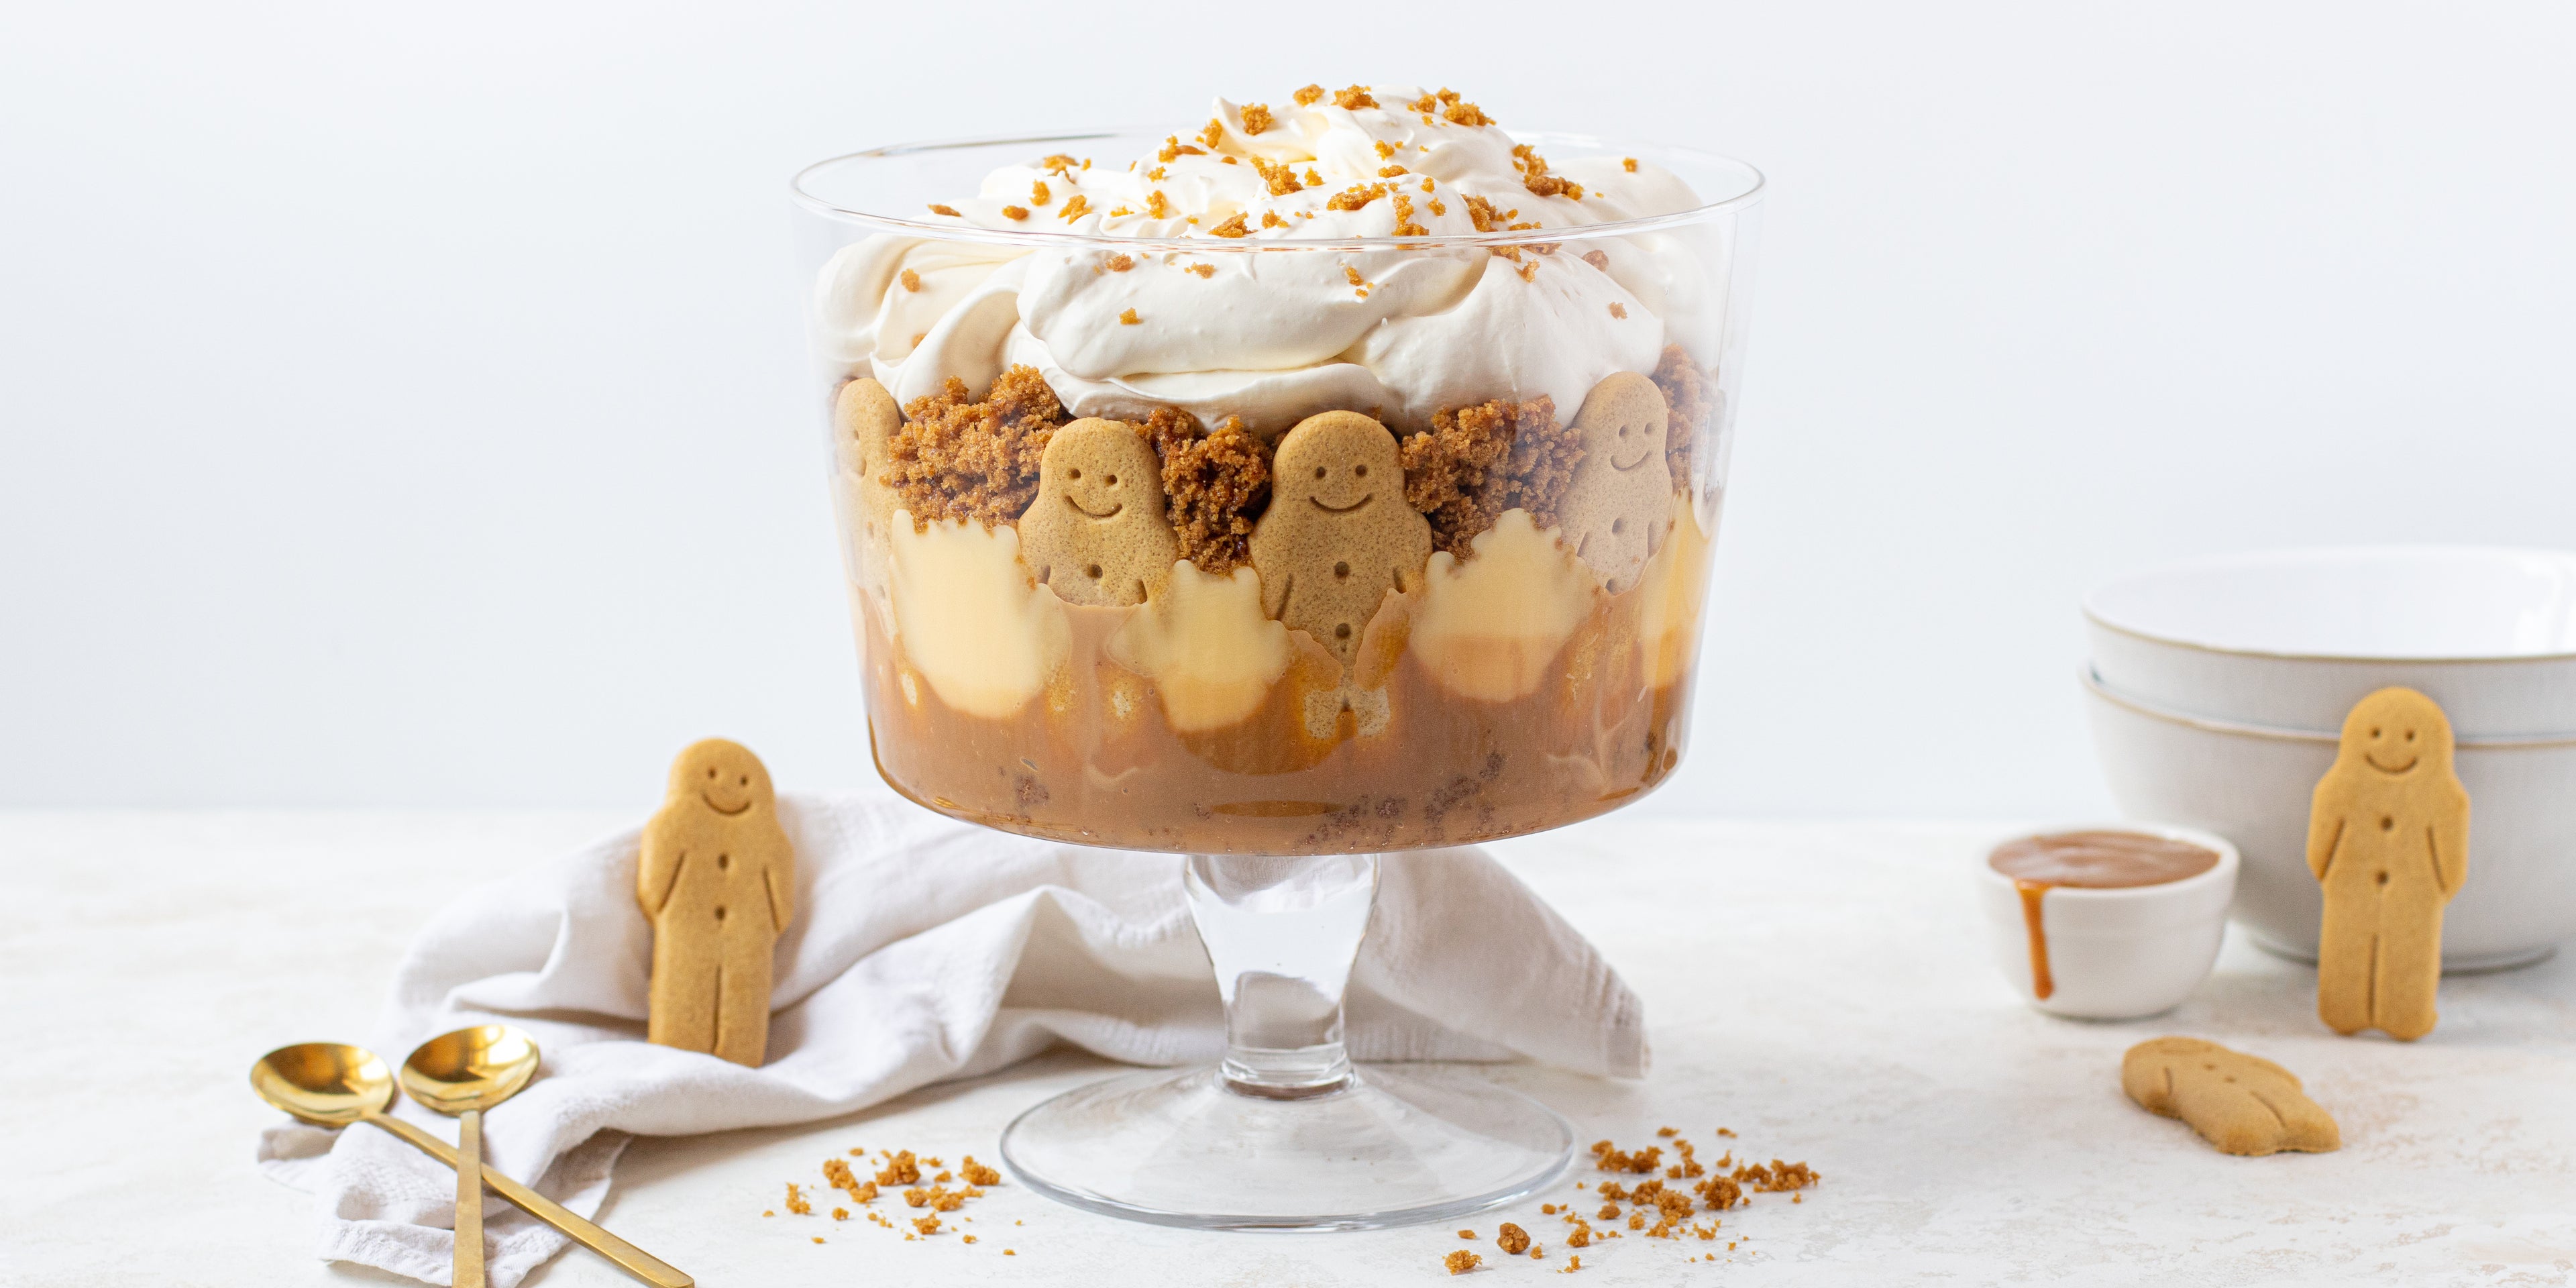 Gingerbread Trifle layered with gingerbread men, custard and cream, with gingerbread men surrounding the trifle bowl